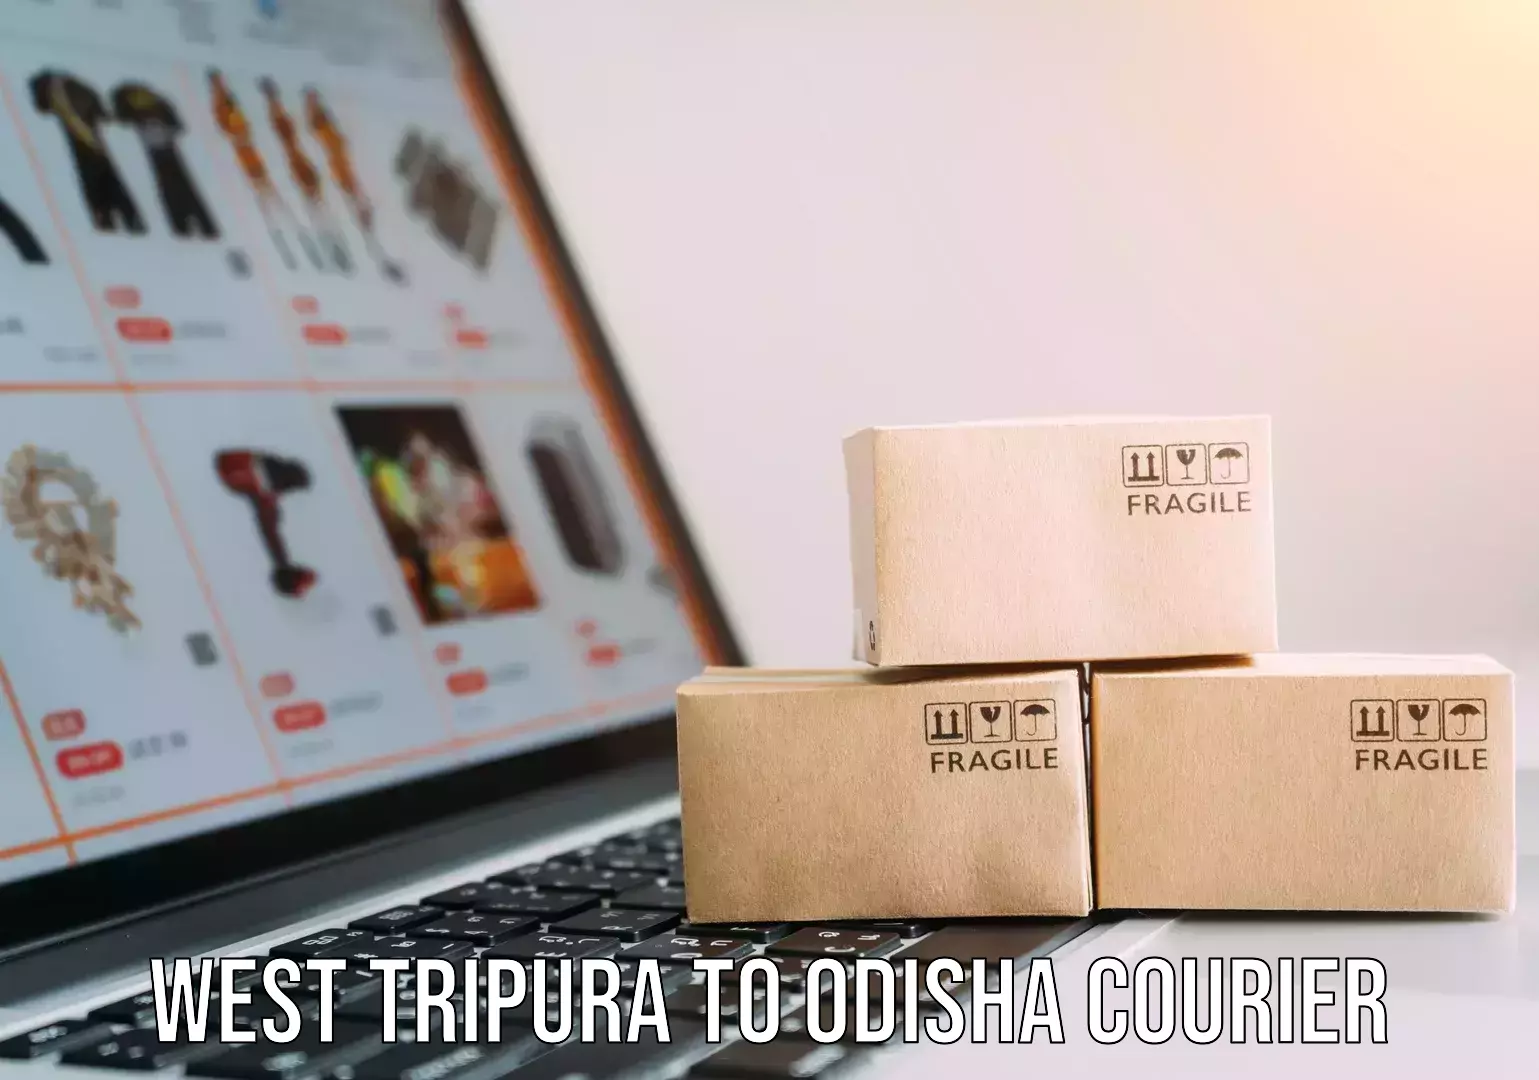 International courier rates in West Tripura to Odisha